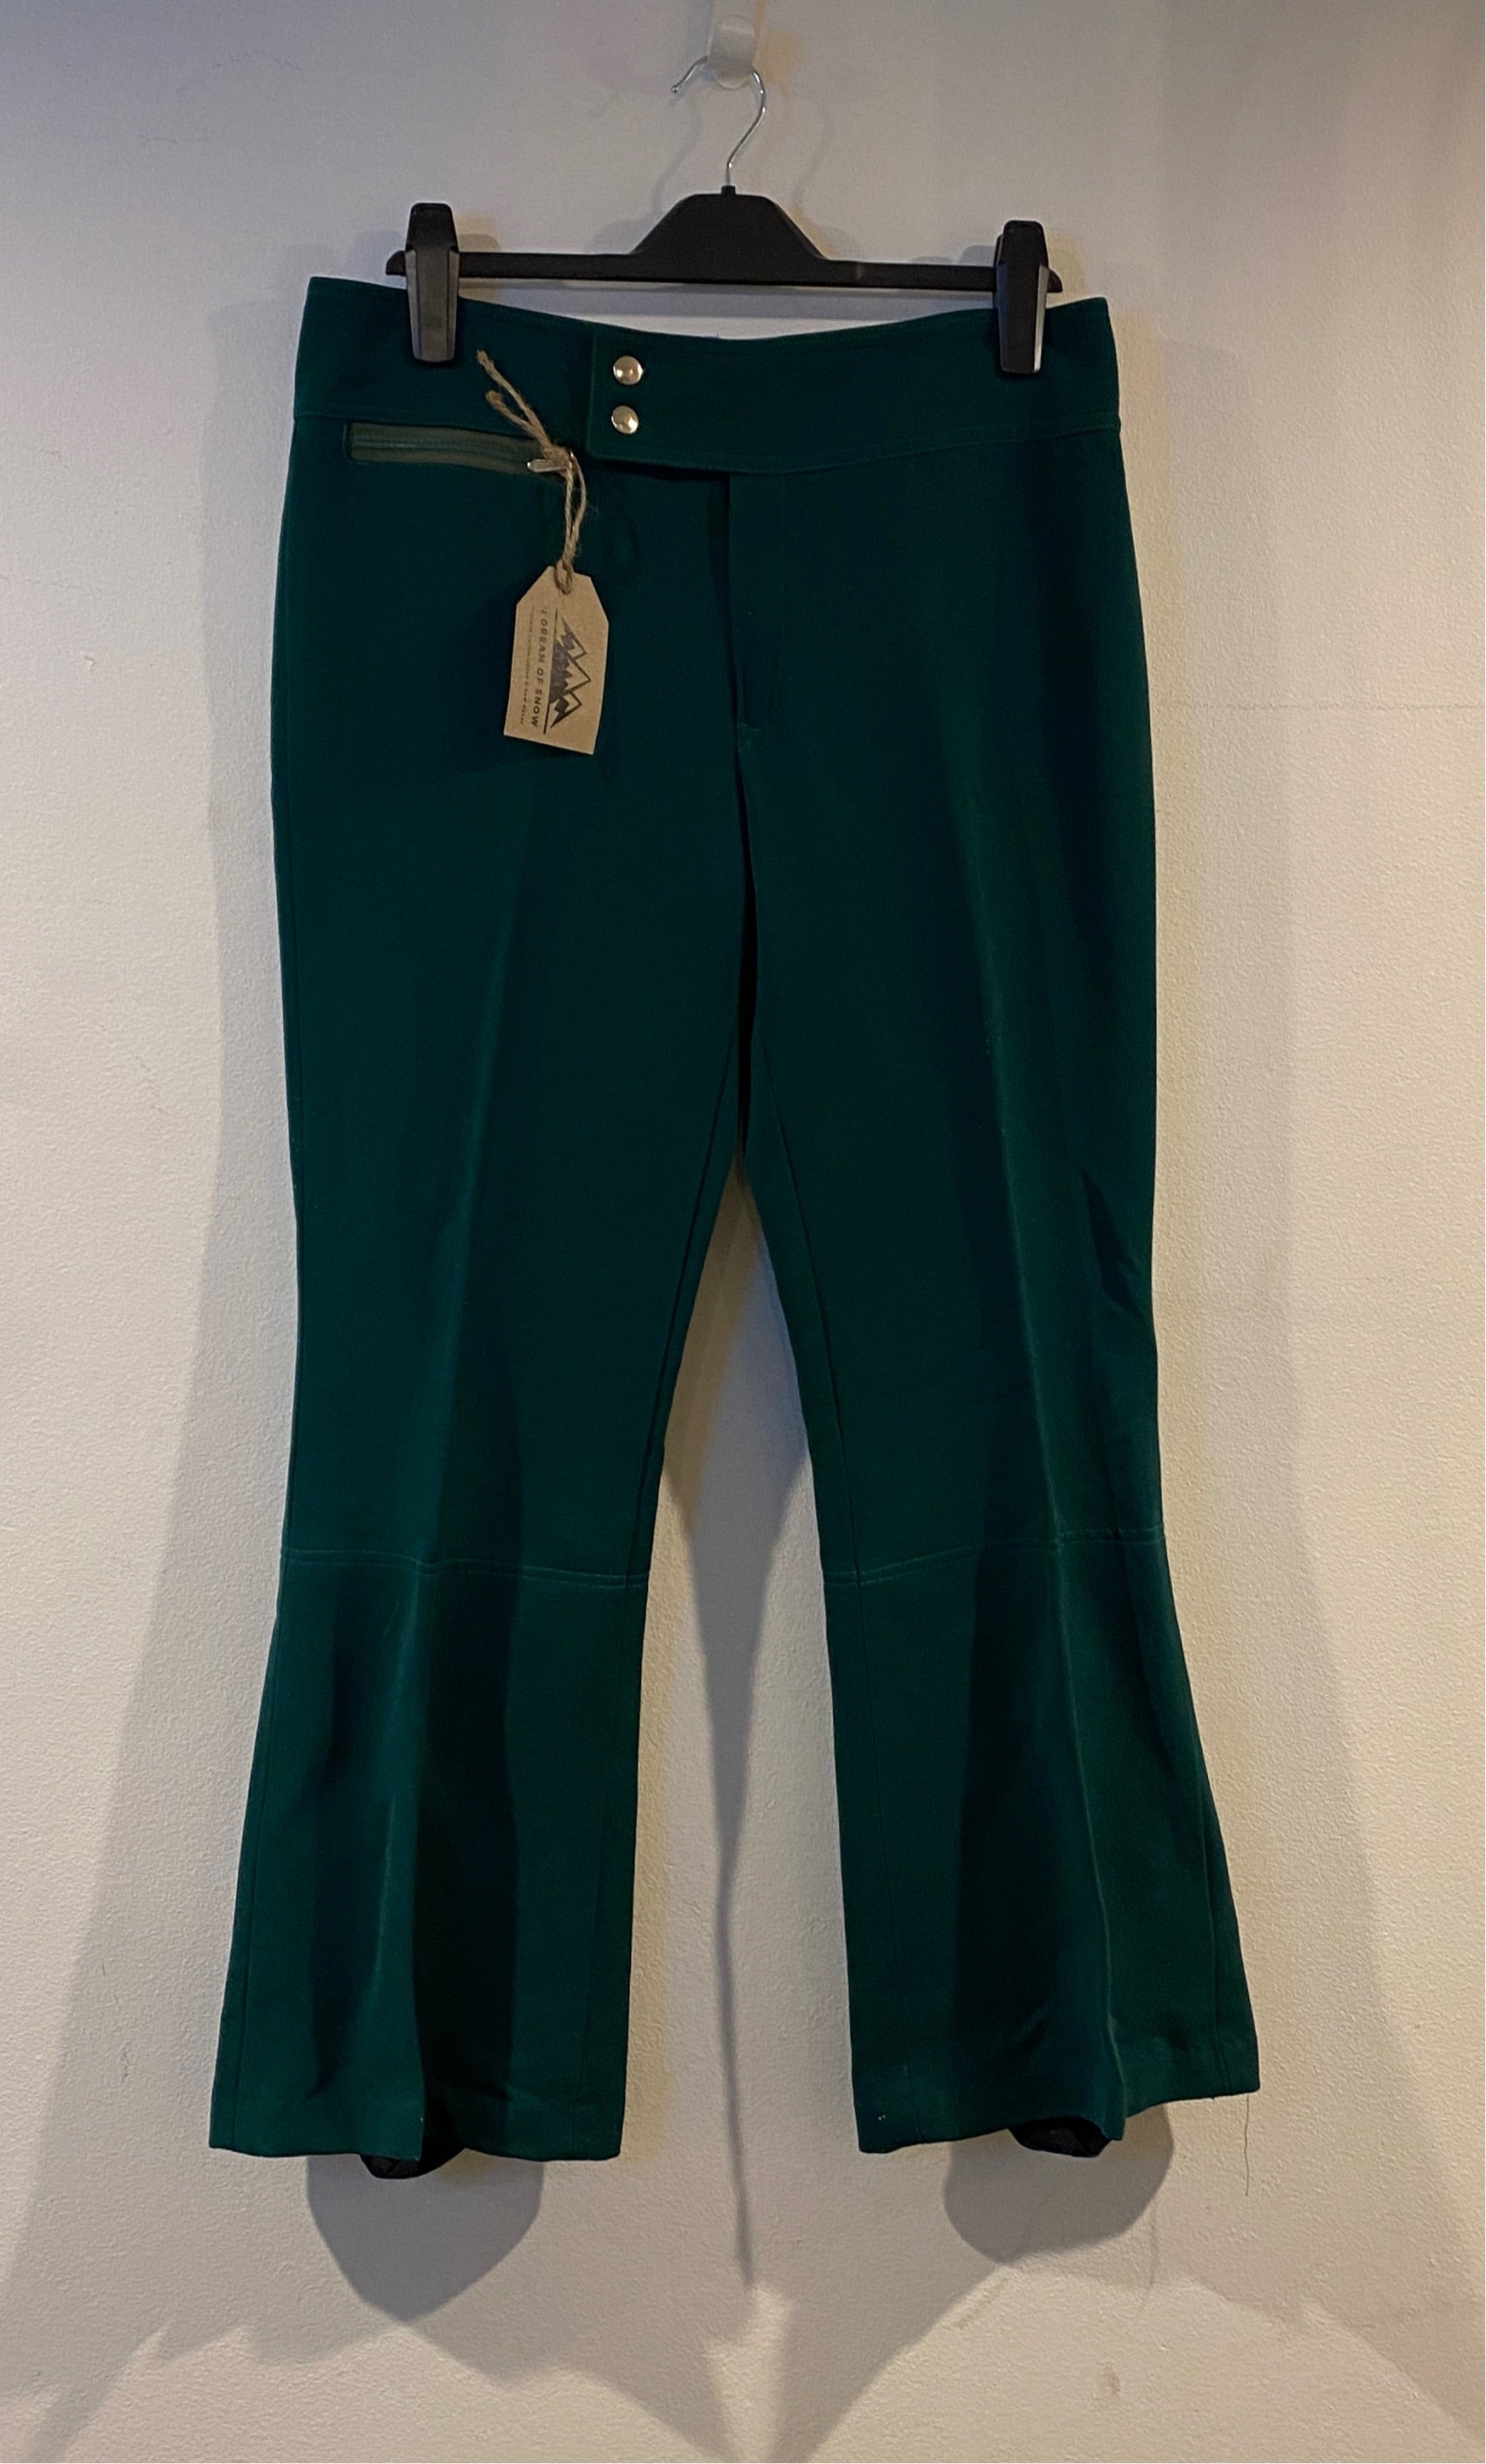 Vintage Olympia green ski pants. hanging front view